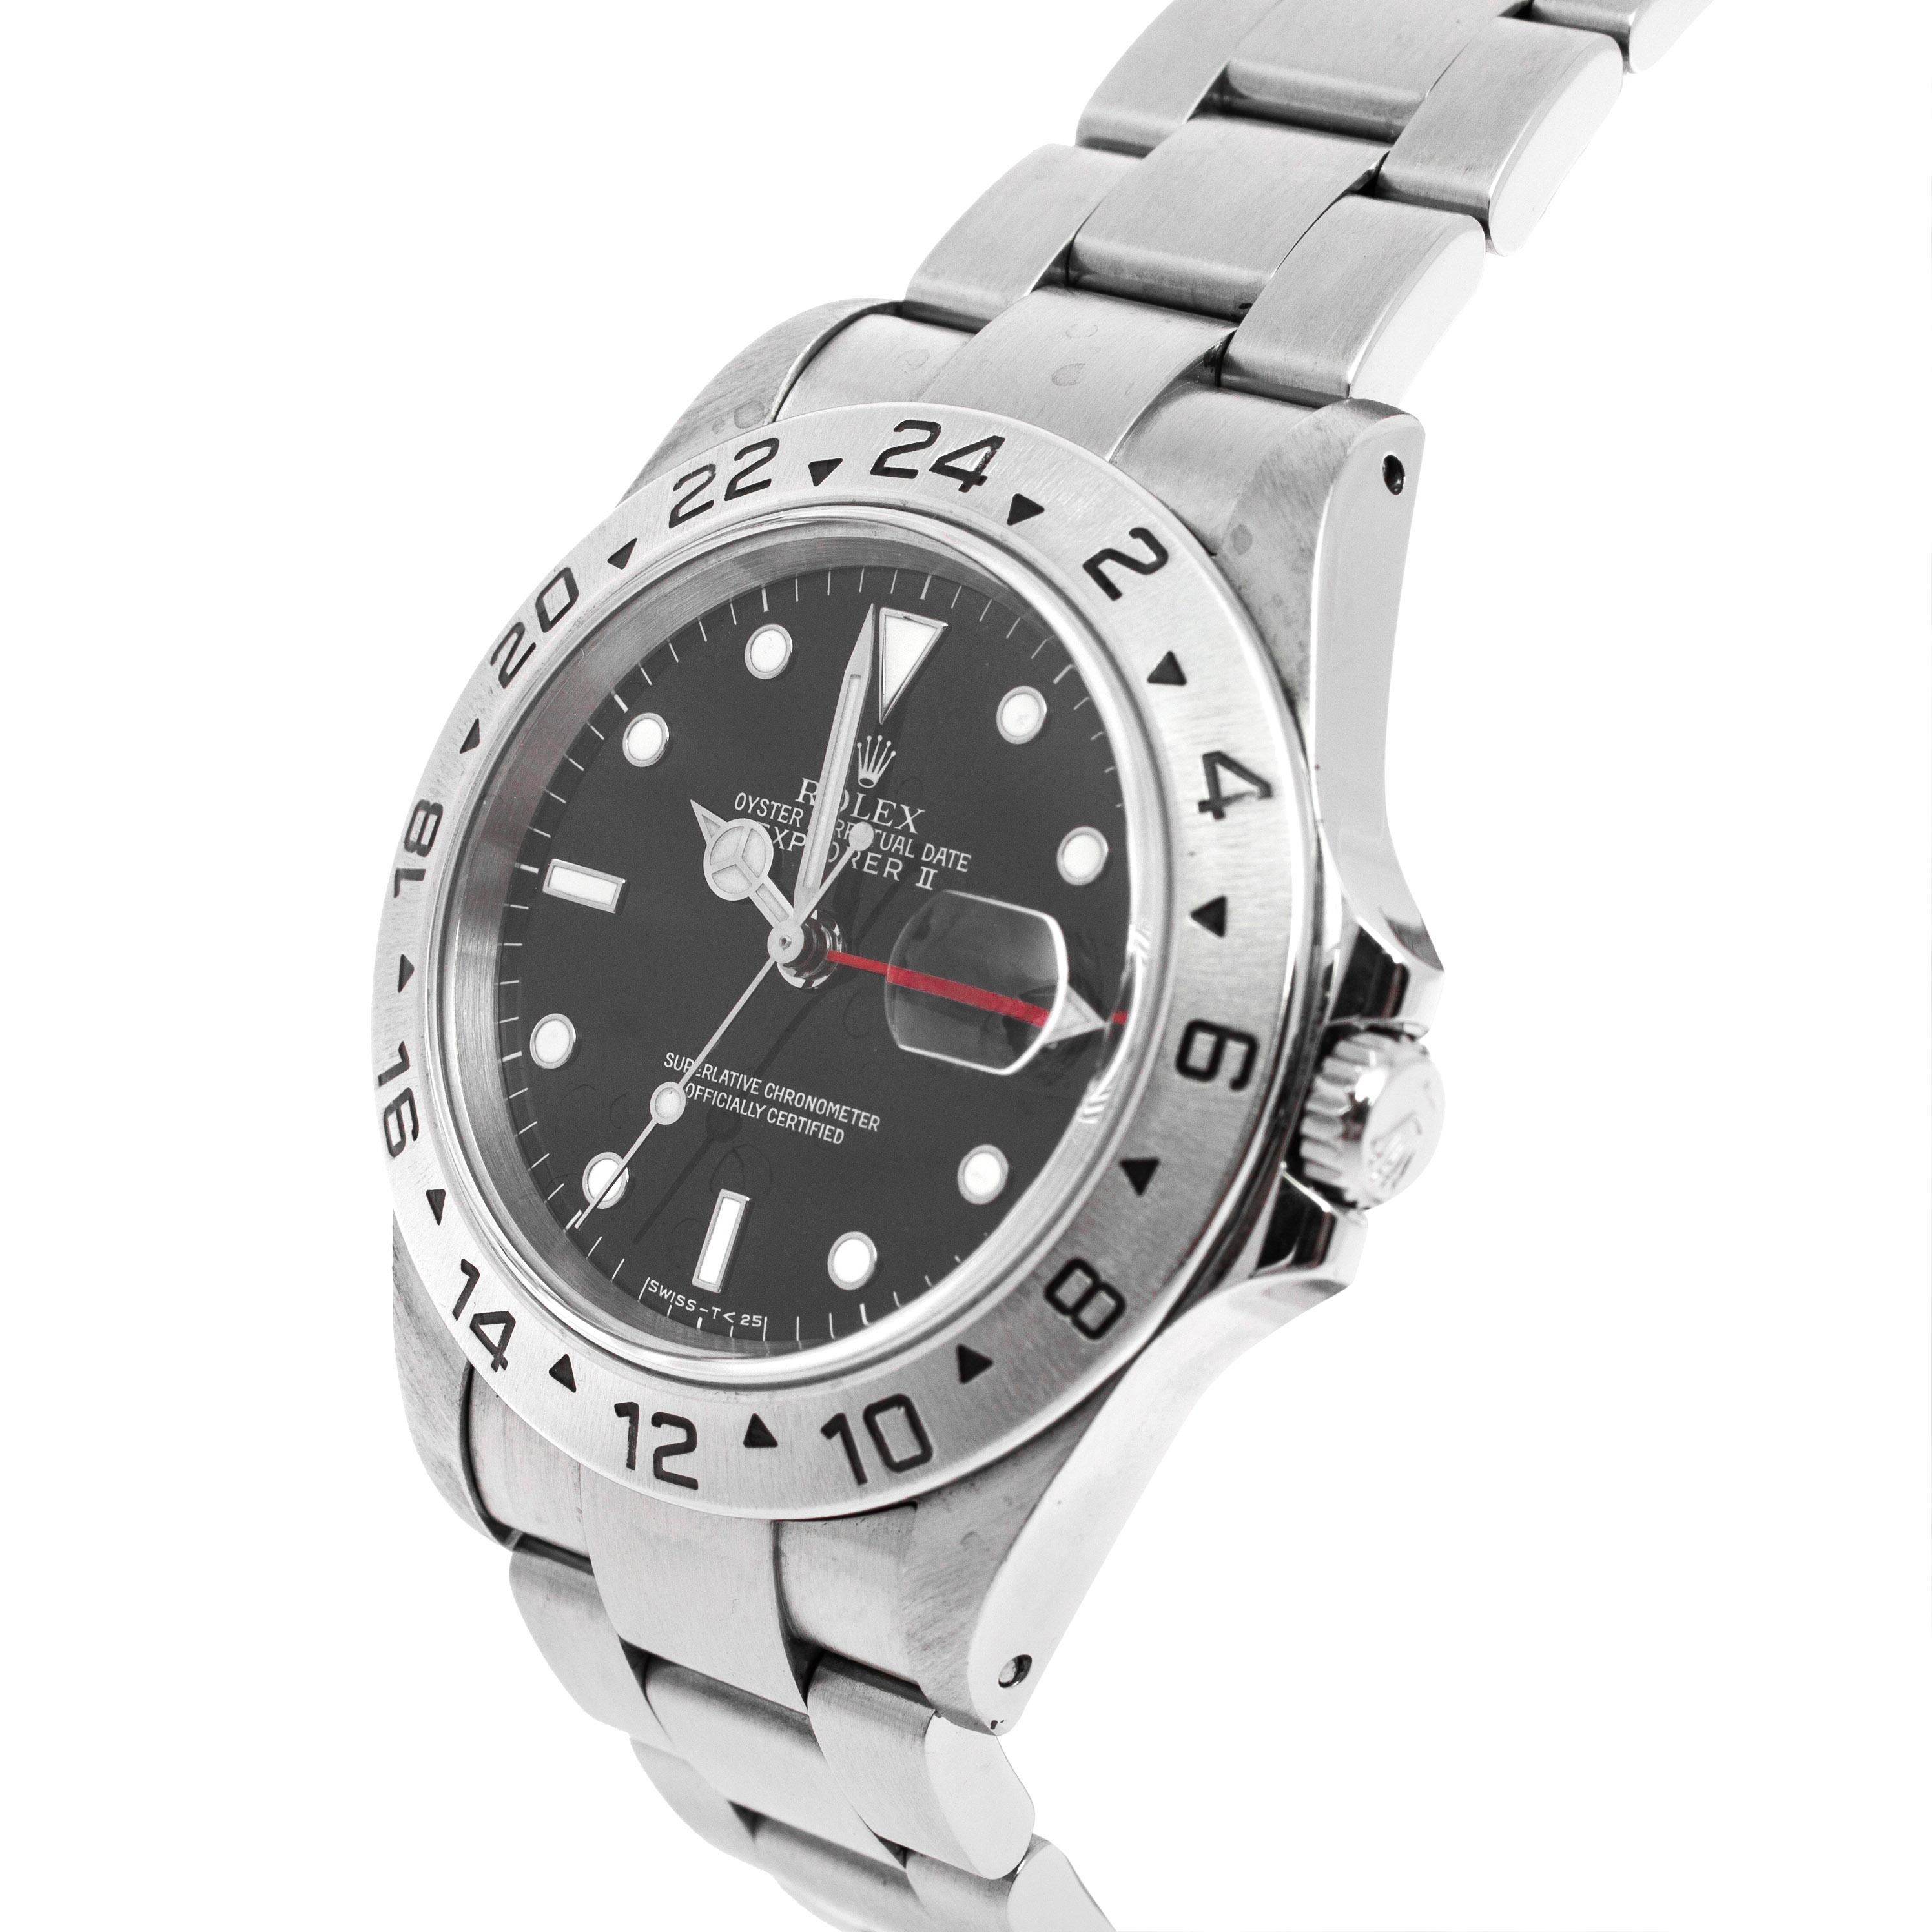 The Explorer II by Rolex has a distinctive black dia set with chromalight hour markers, hands for hours, minutes, and seconds, a date window, and a dedicated arrow-shaped hand that circles in 24 hours rather than 12. The bezel is detailed with